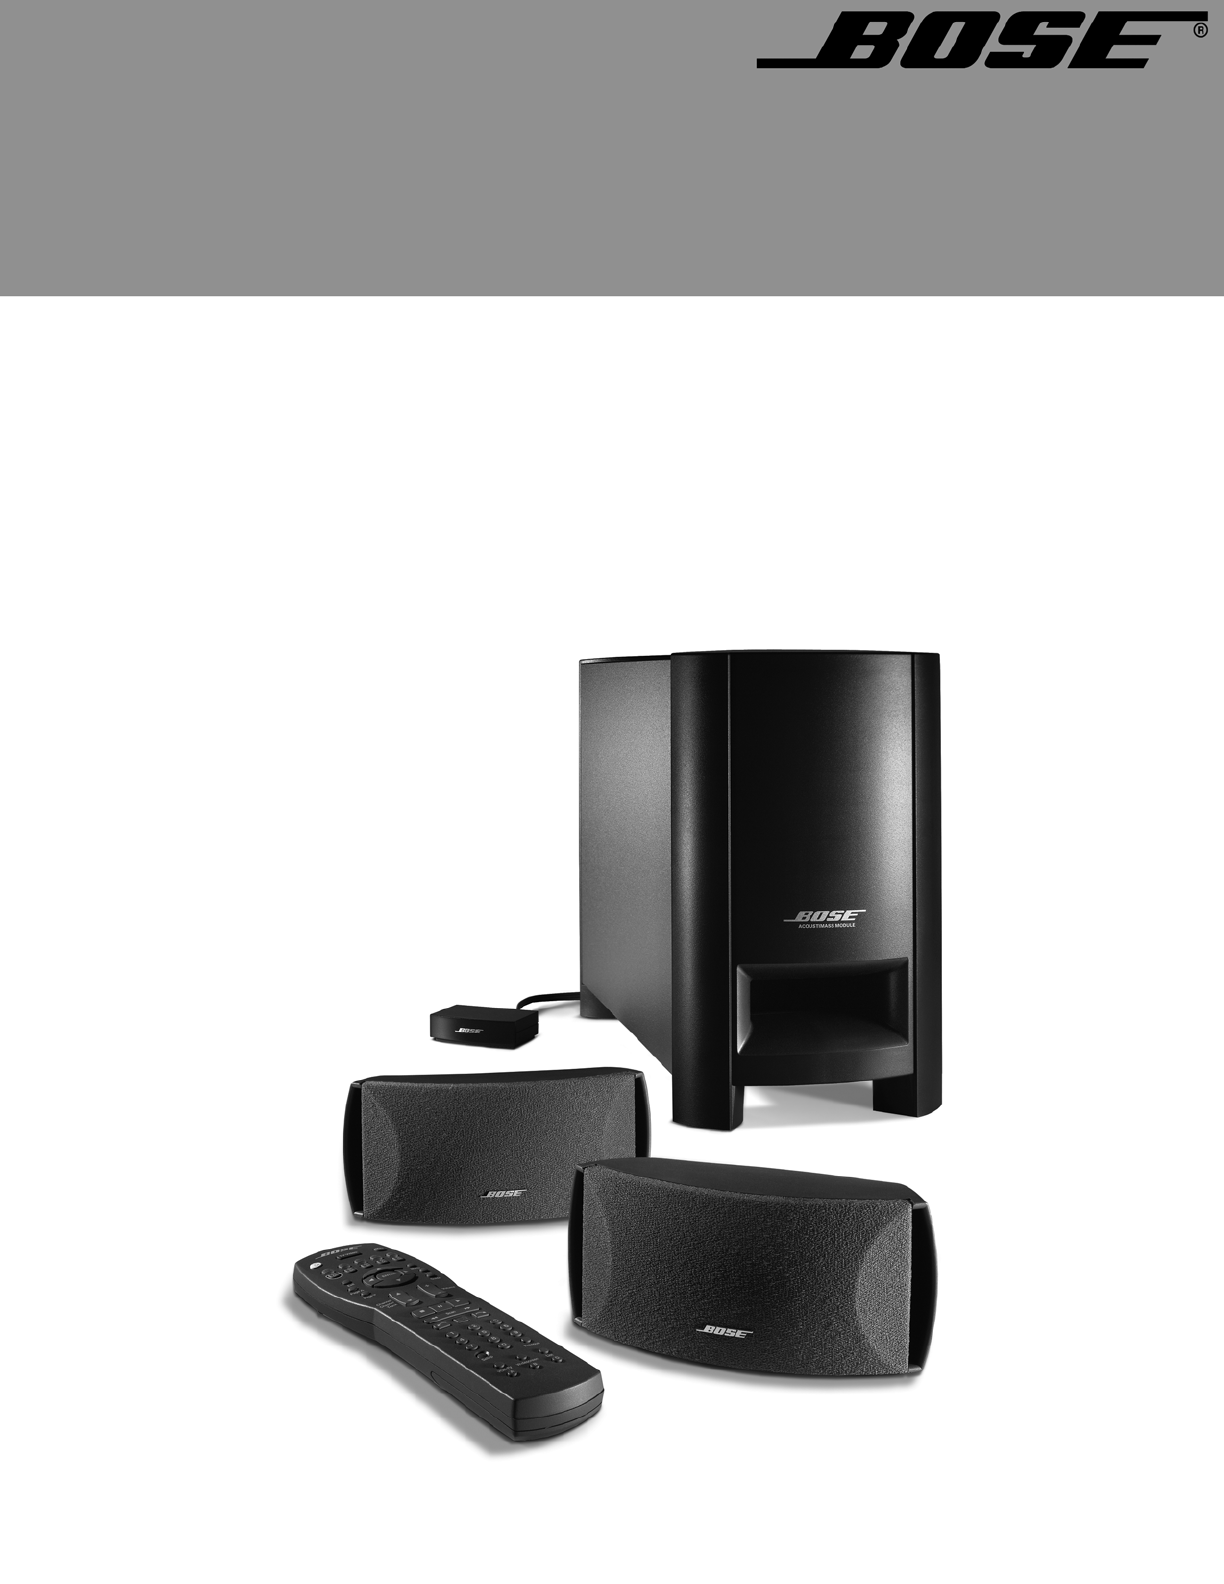 12++ Bose surround sound instruction manual ideas in 2021 